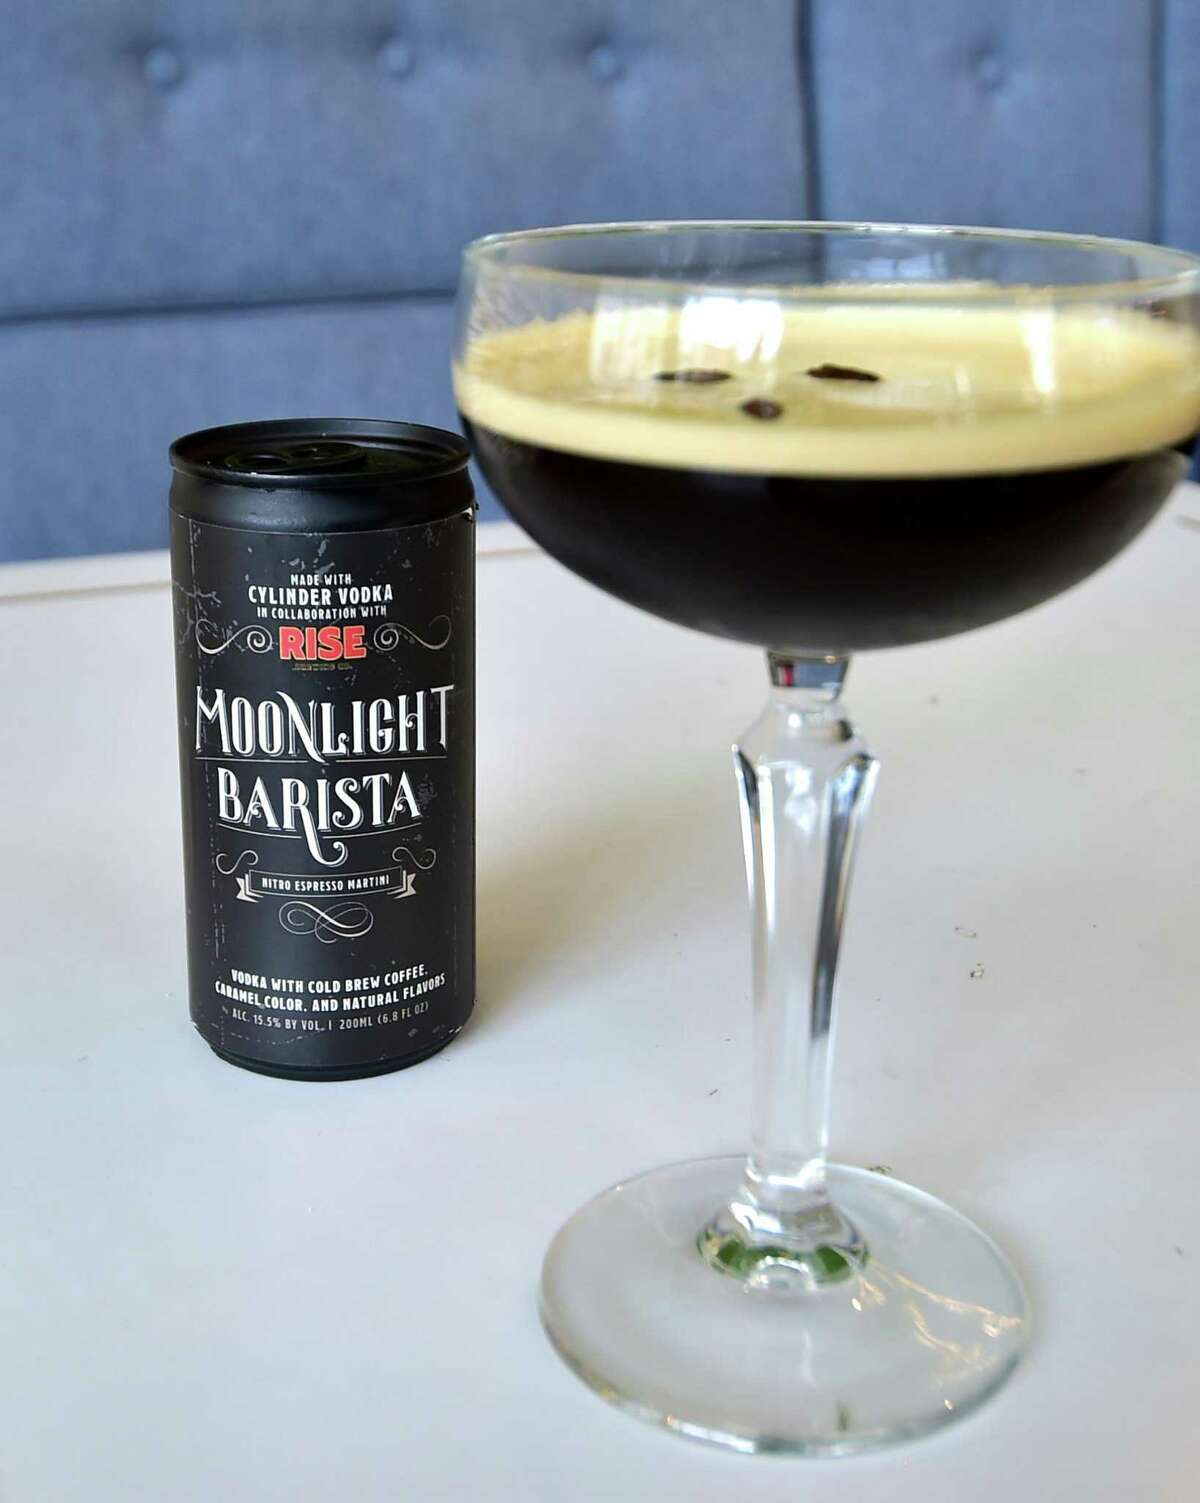 Moonlight Barista is a new nitro espresso martini produced by Stamford-based companies, CoreBev Group and Rise Brewing Co.